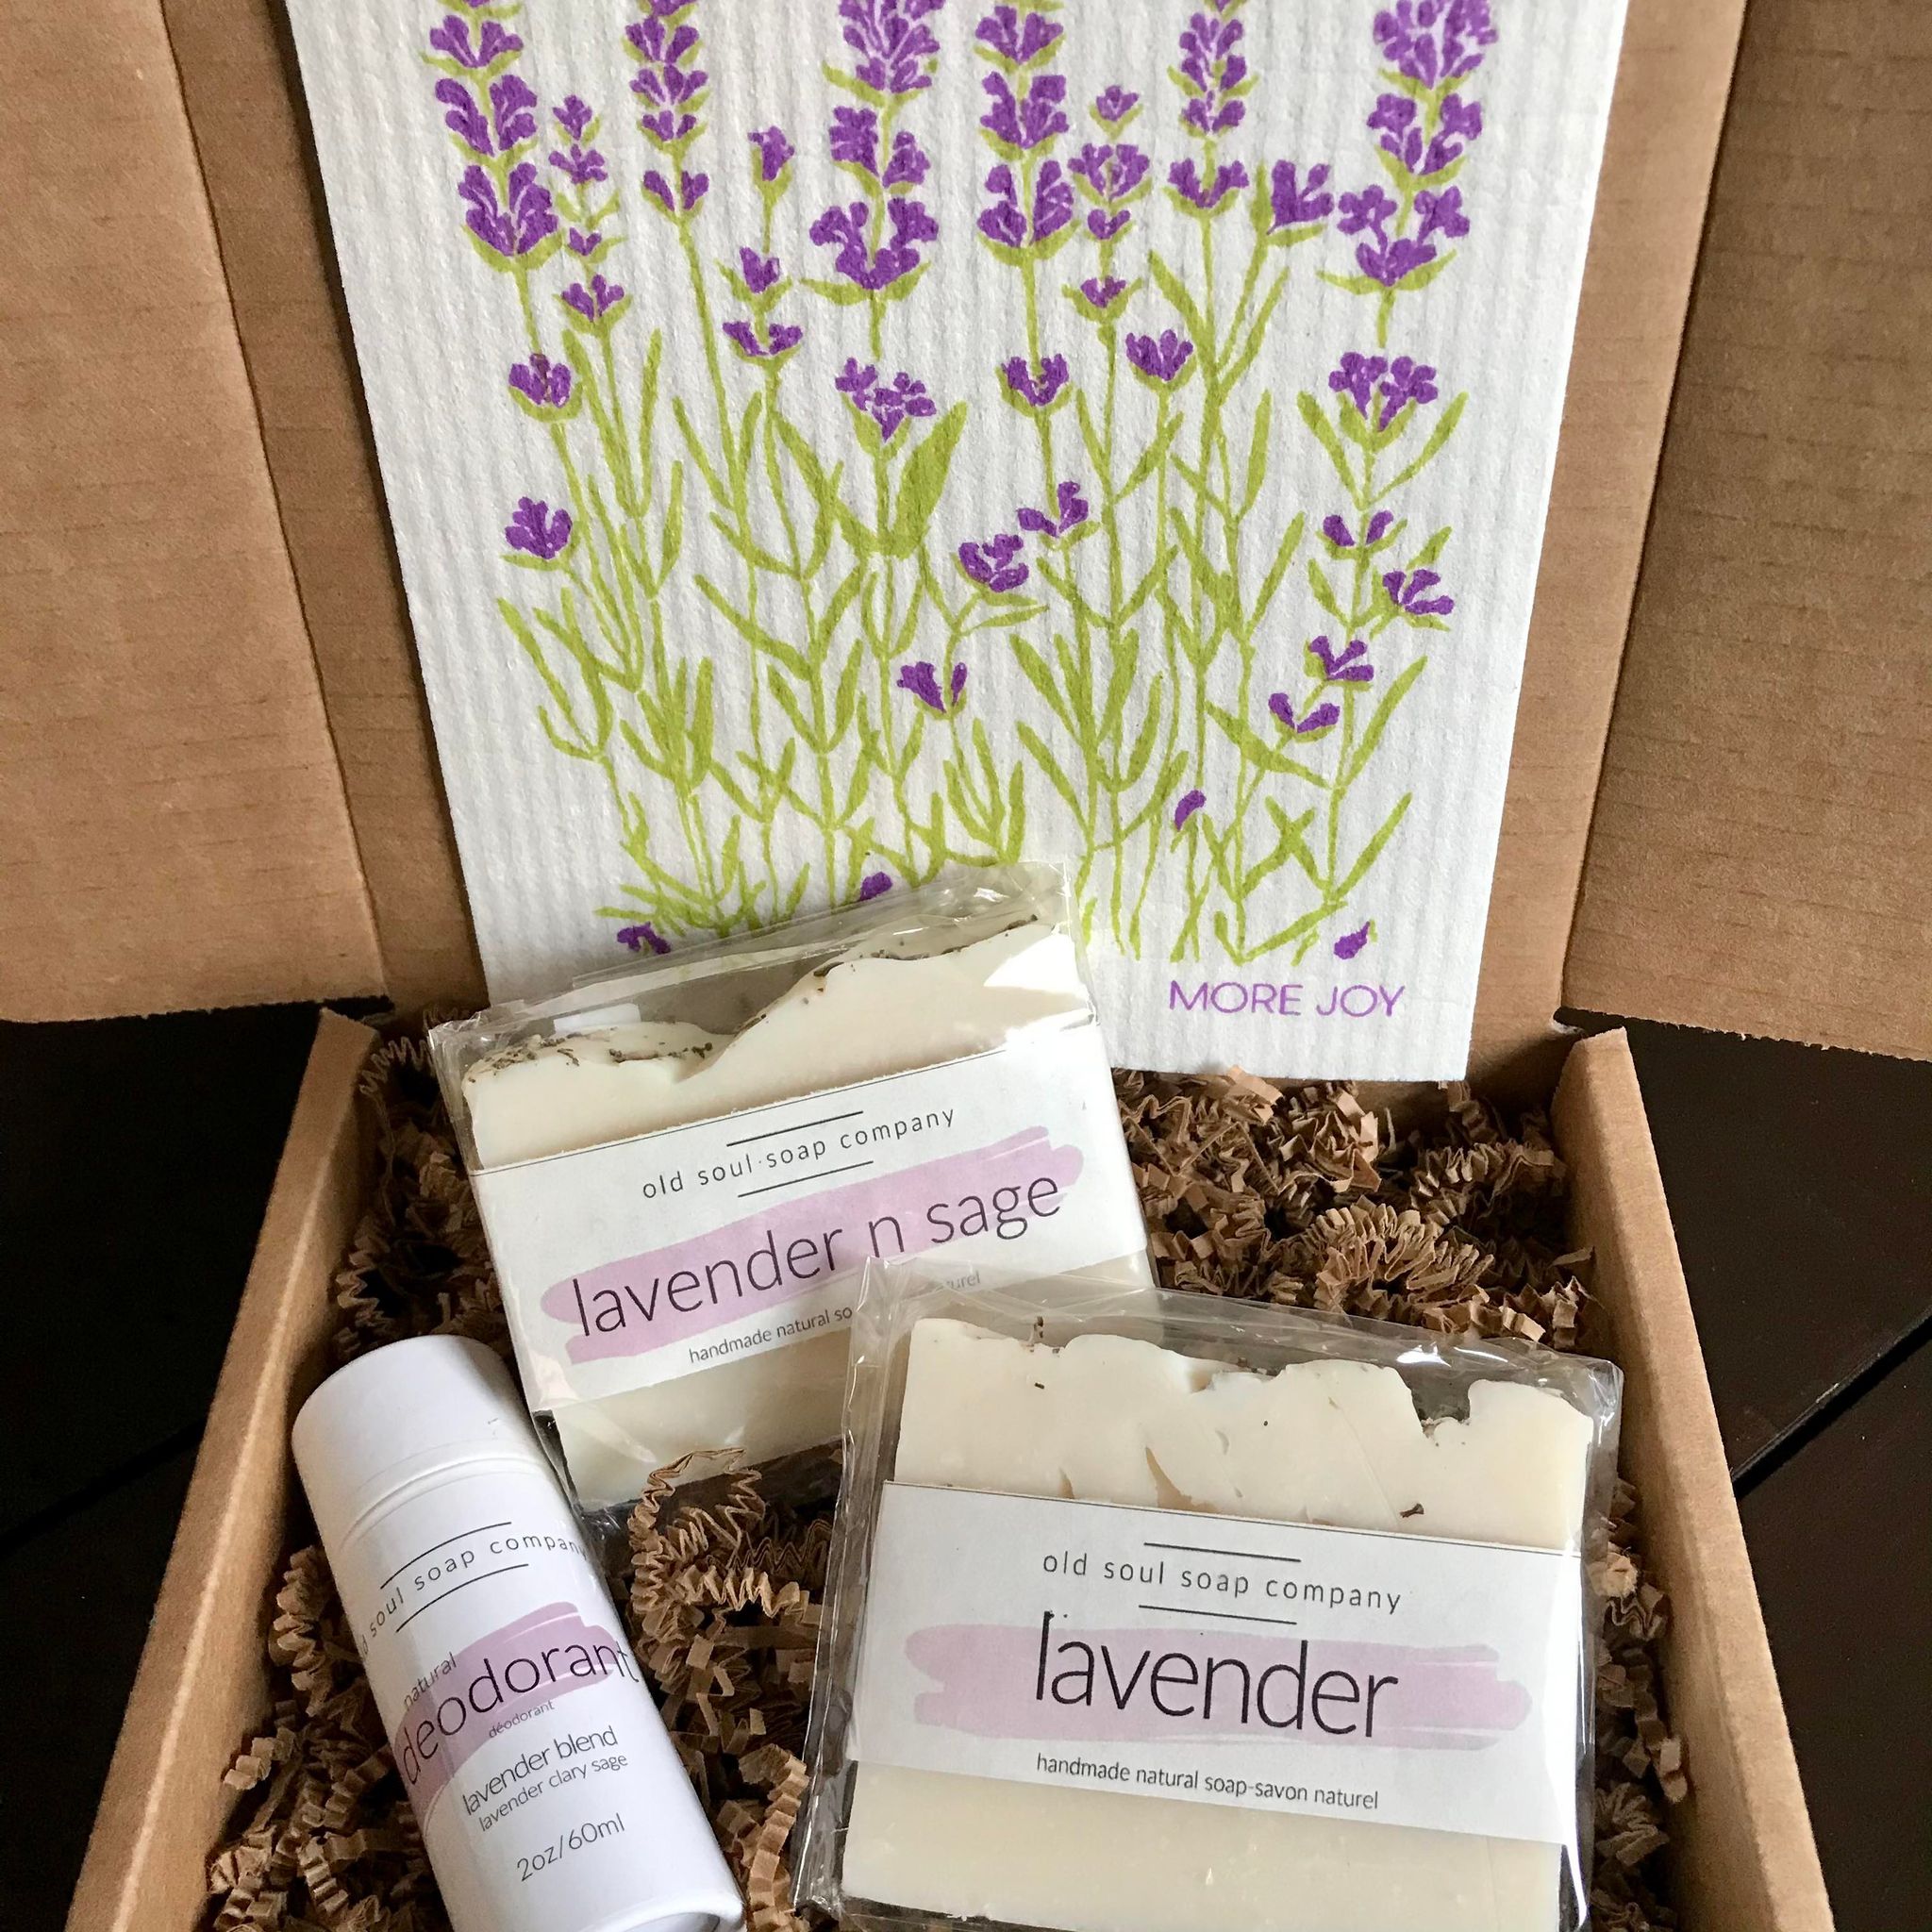 Included in this gift box is a lavender deodorant and two vegan soaps - lavender and lavender 'n sage from the Old Soul Soap Company along with a lavender themed More Joy Swedish cloth.